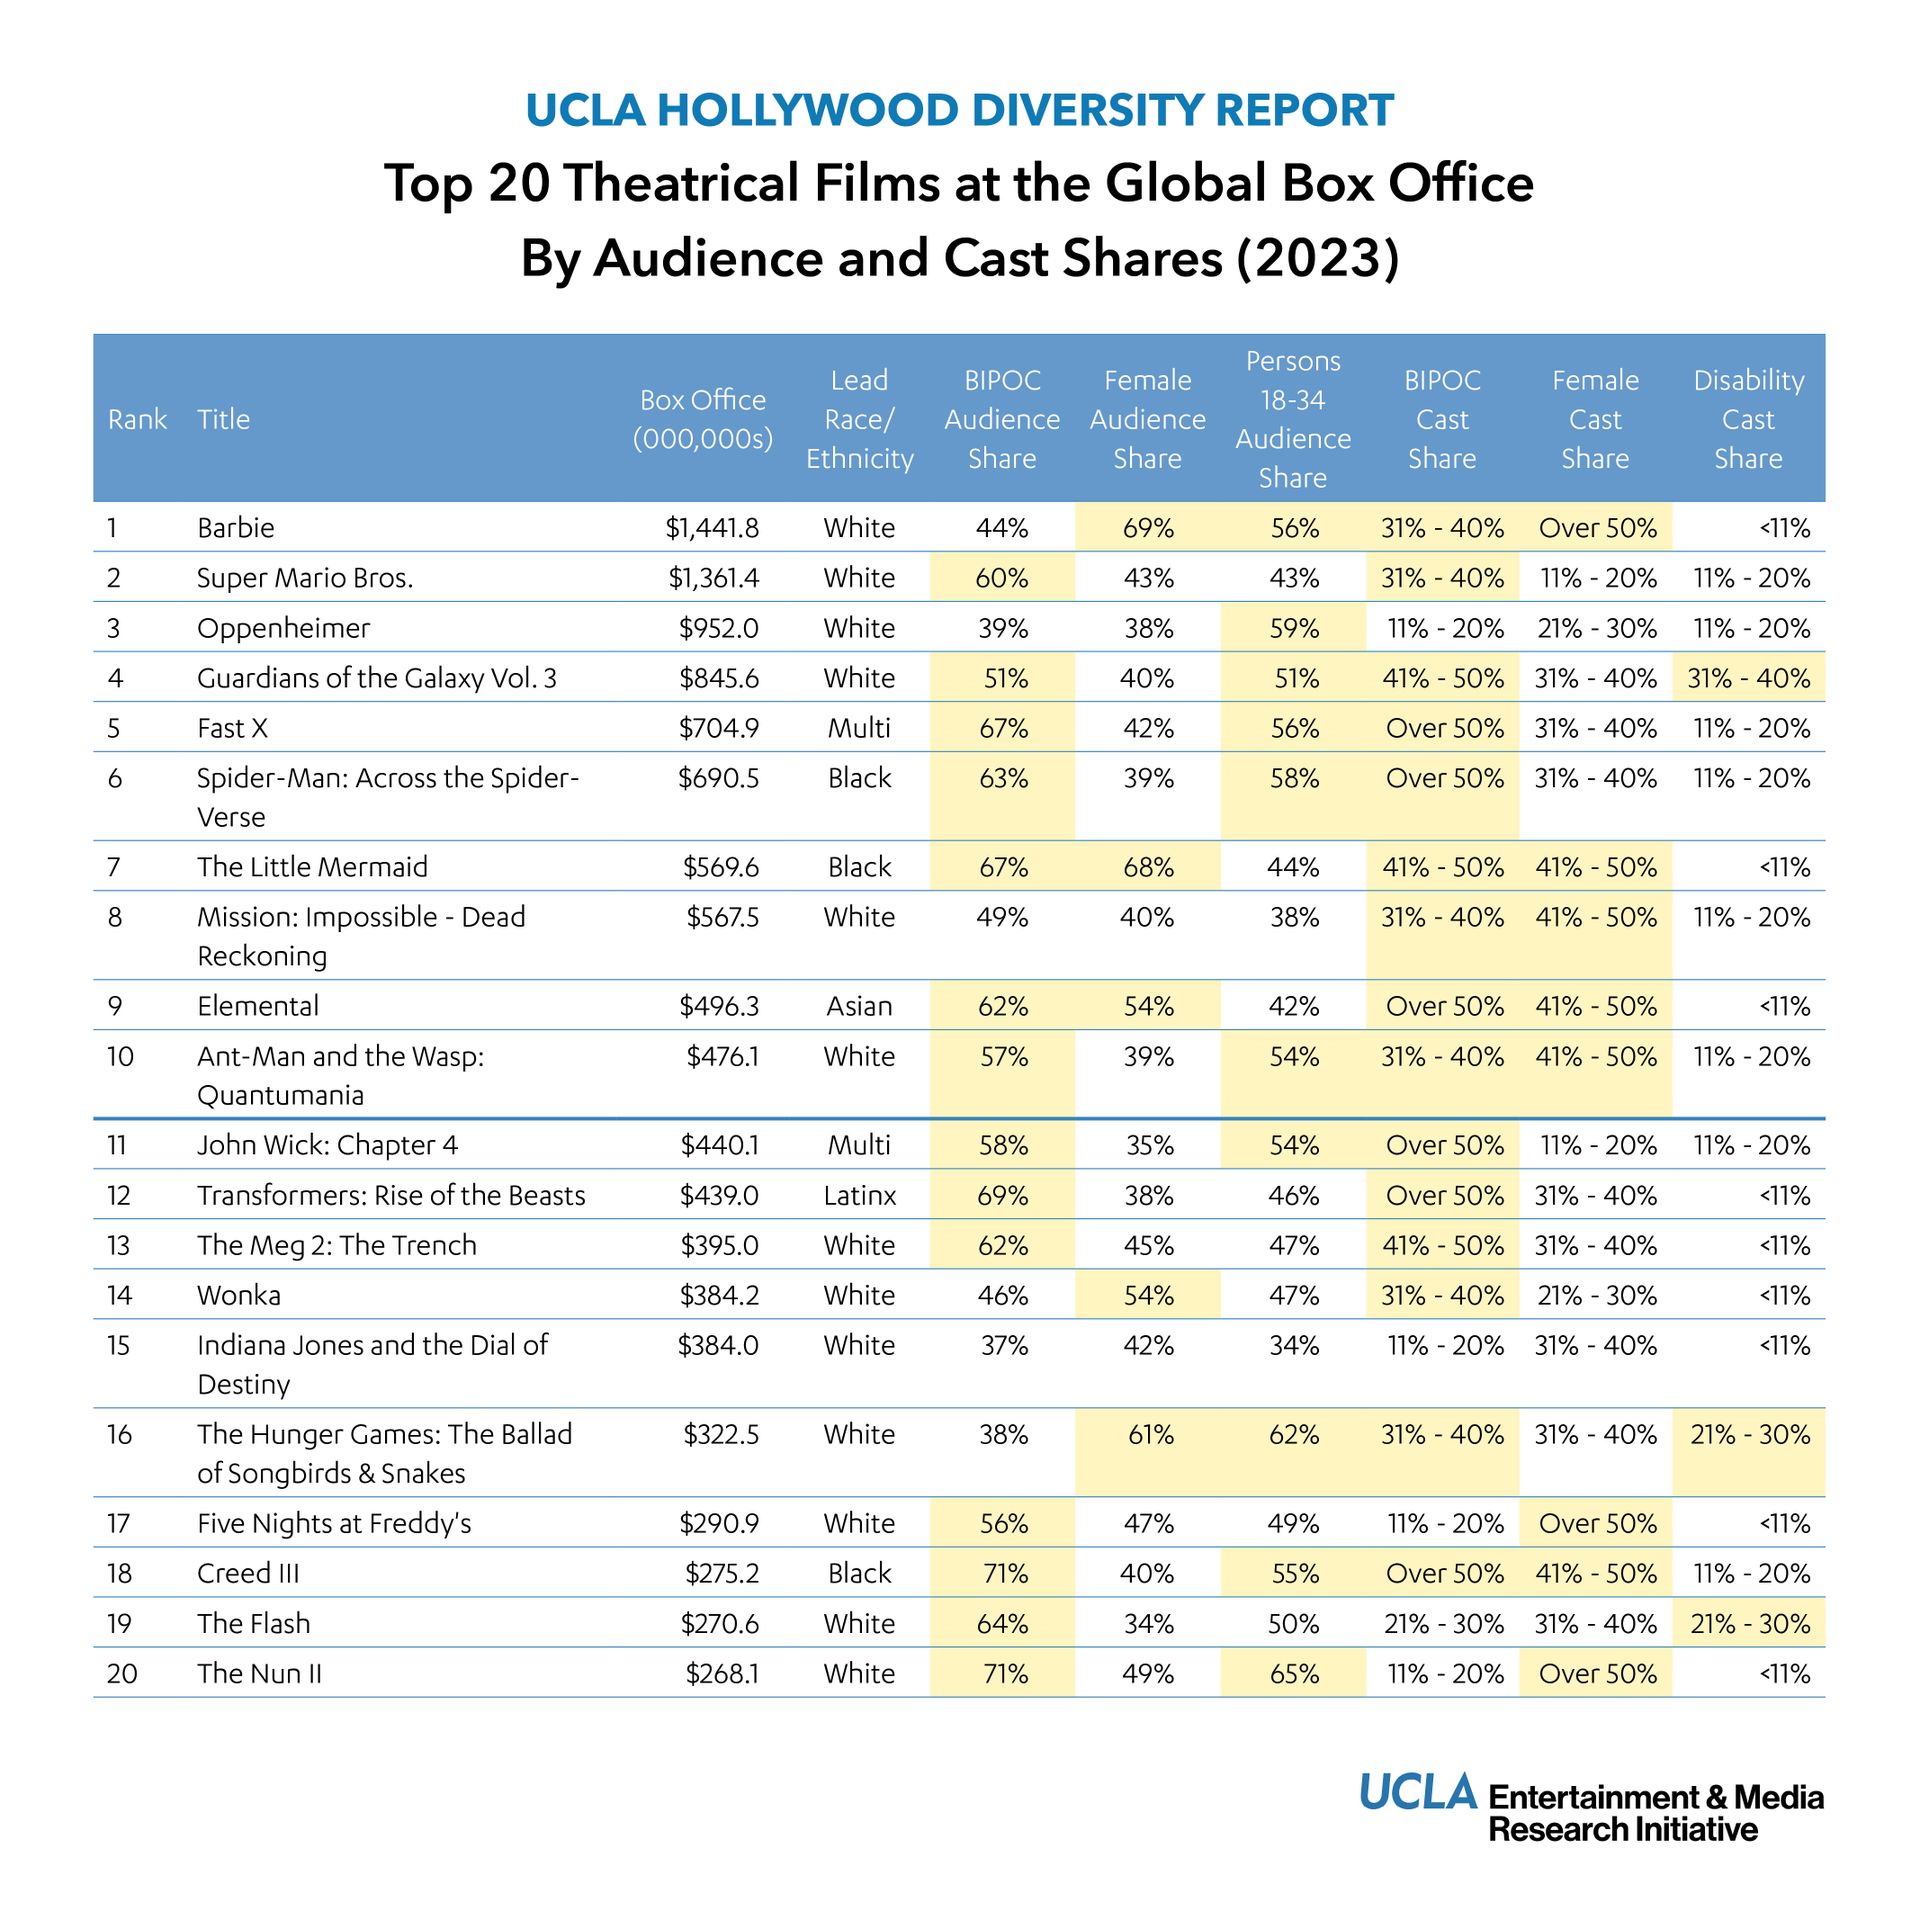 Chart from the UCLA Hollywood Diversity Report showing the top 20 theatrical films at the global box office in 2023